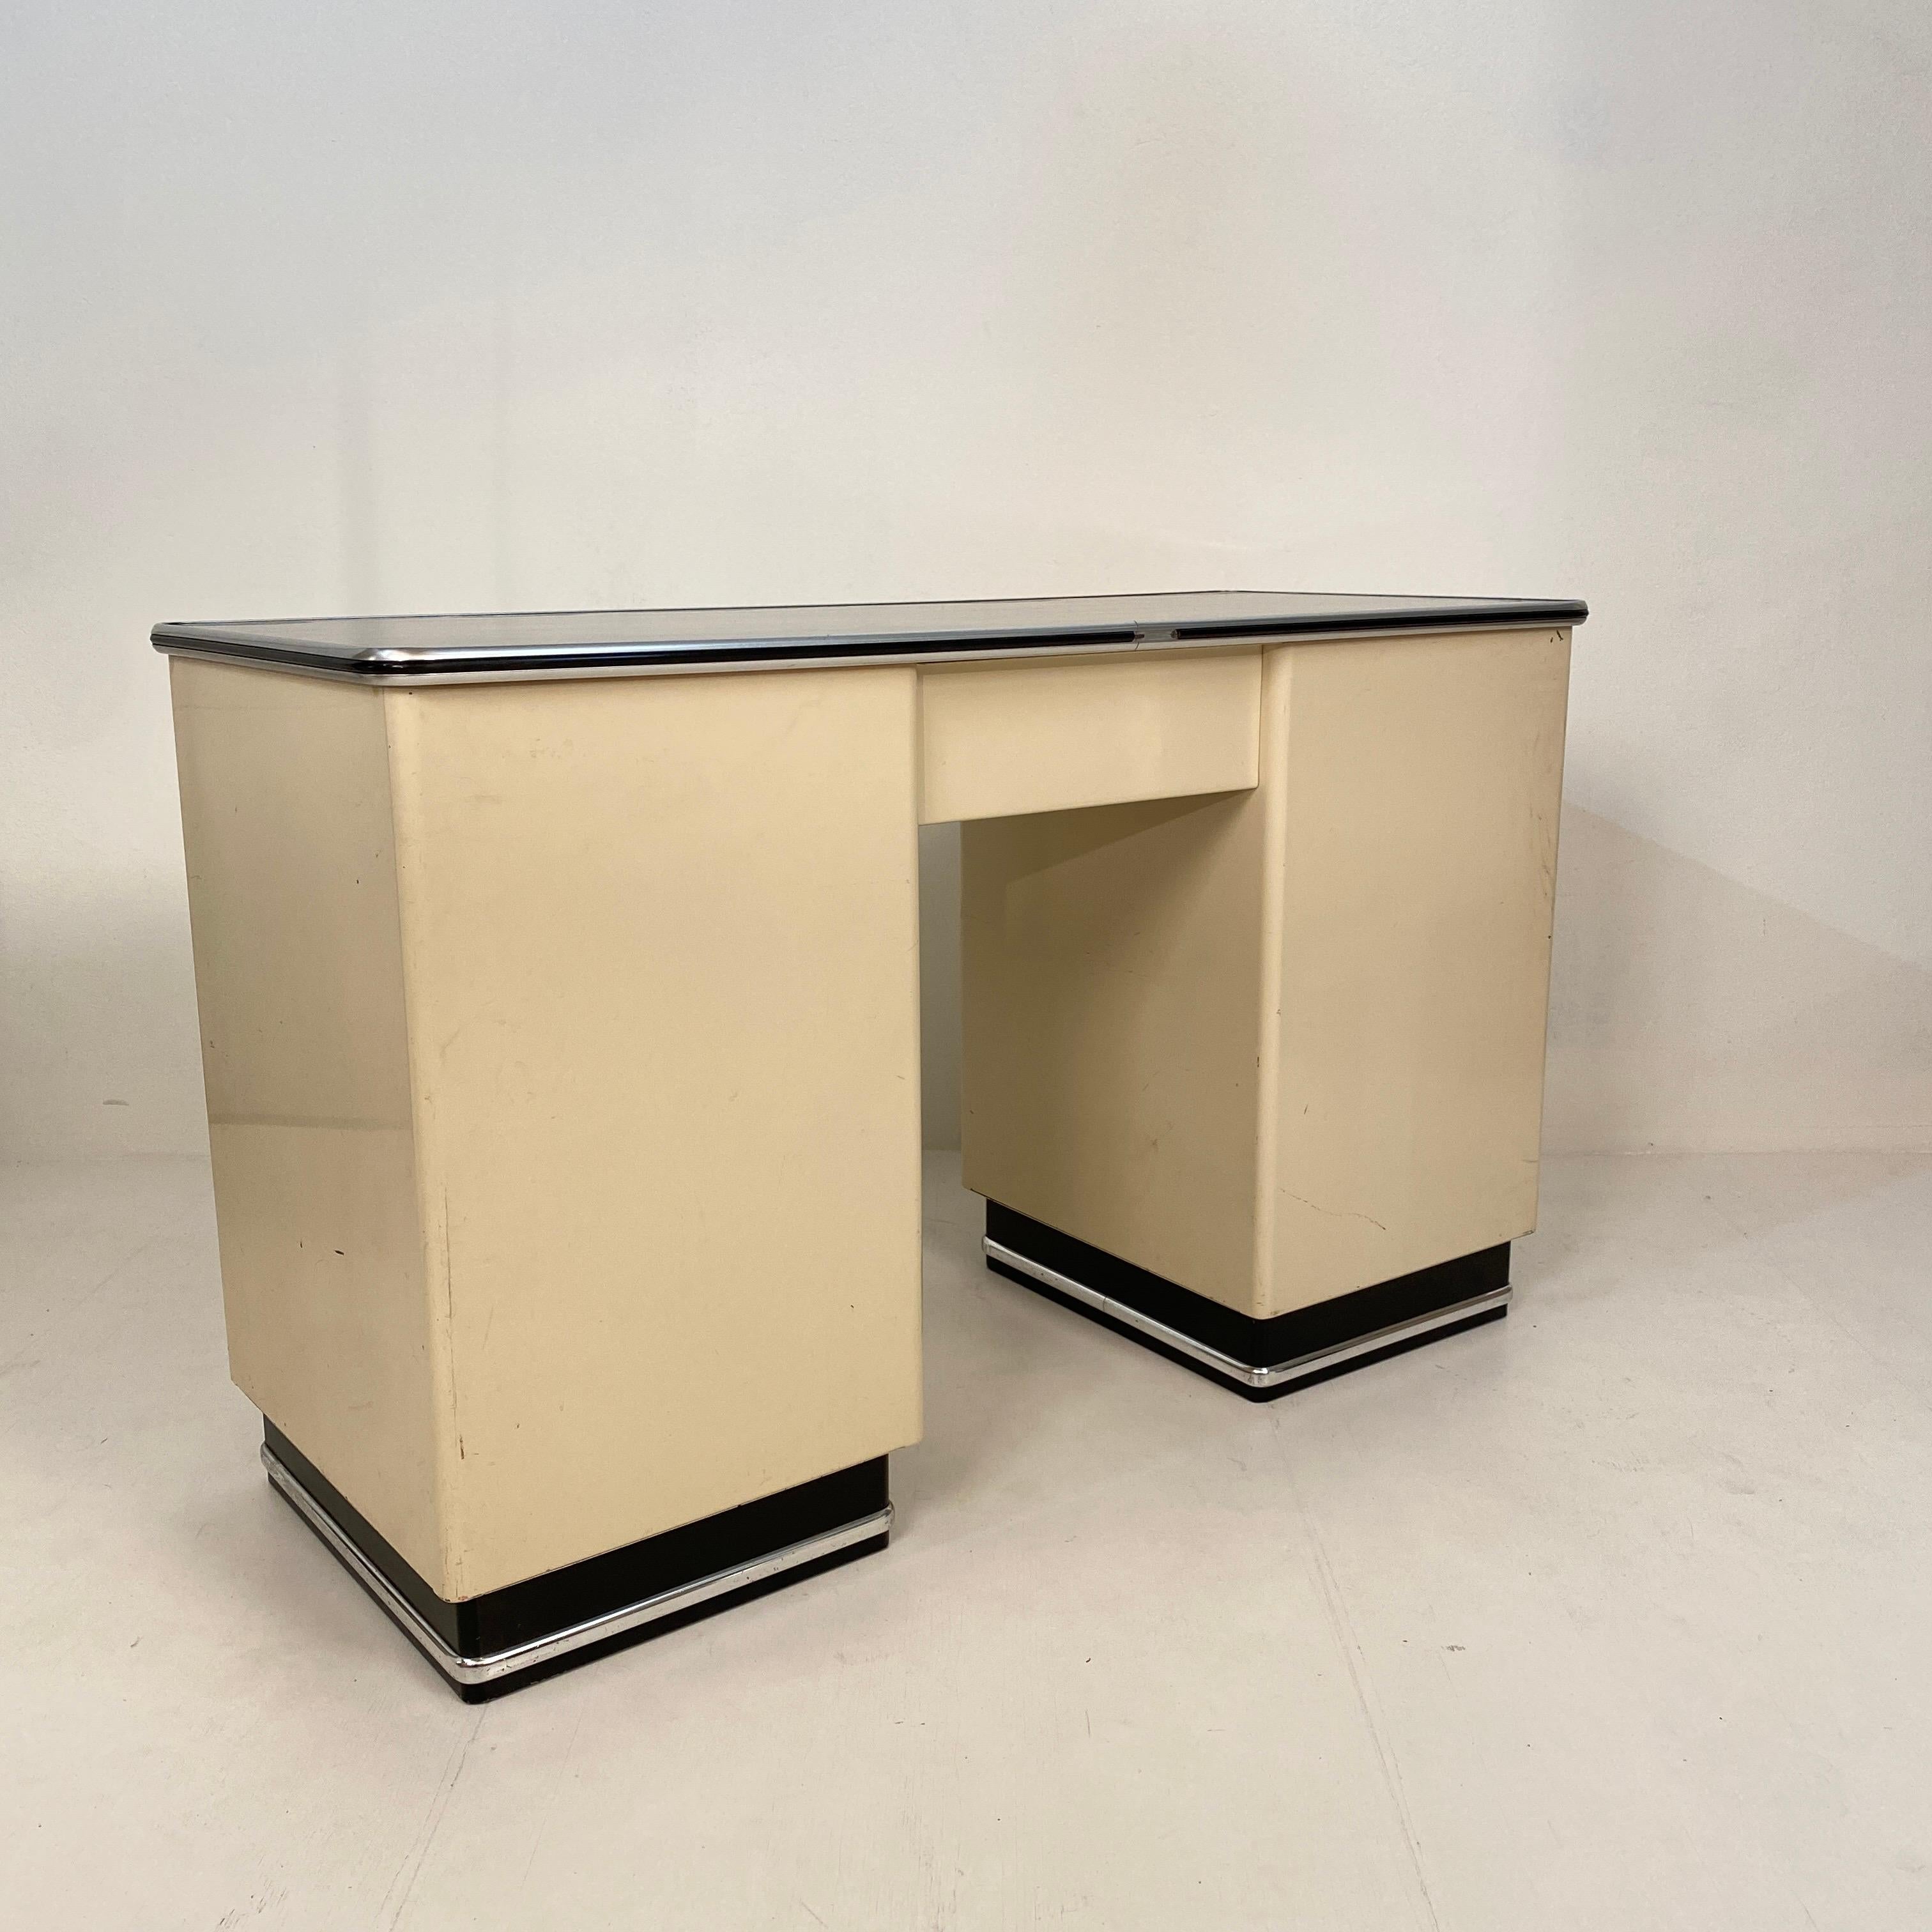 1930s German Bauhaus Desk Out of White Lacquered Metal and a Black Linoleum Top 4